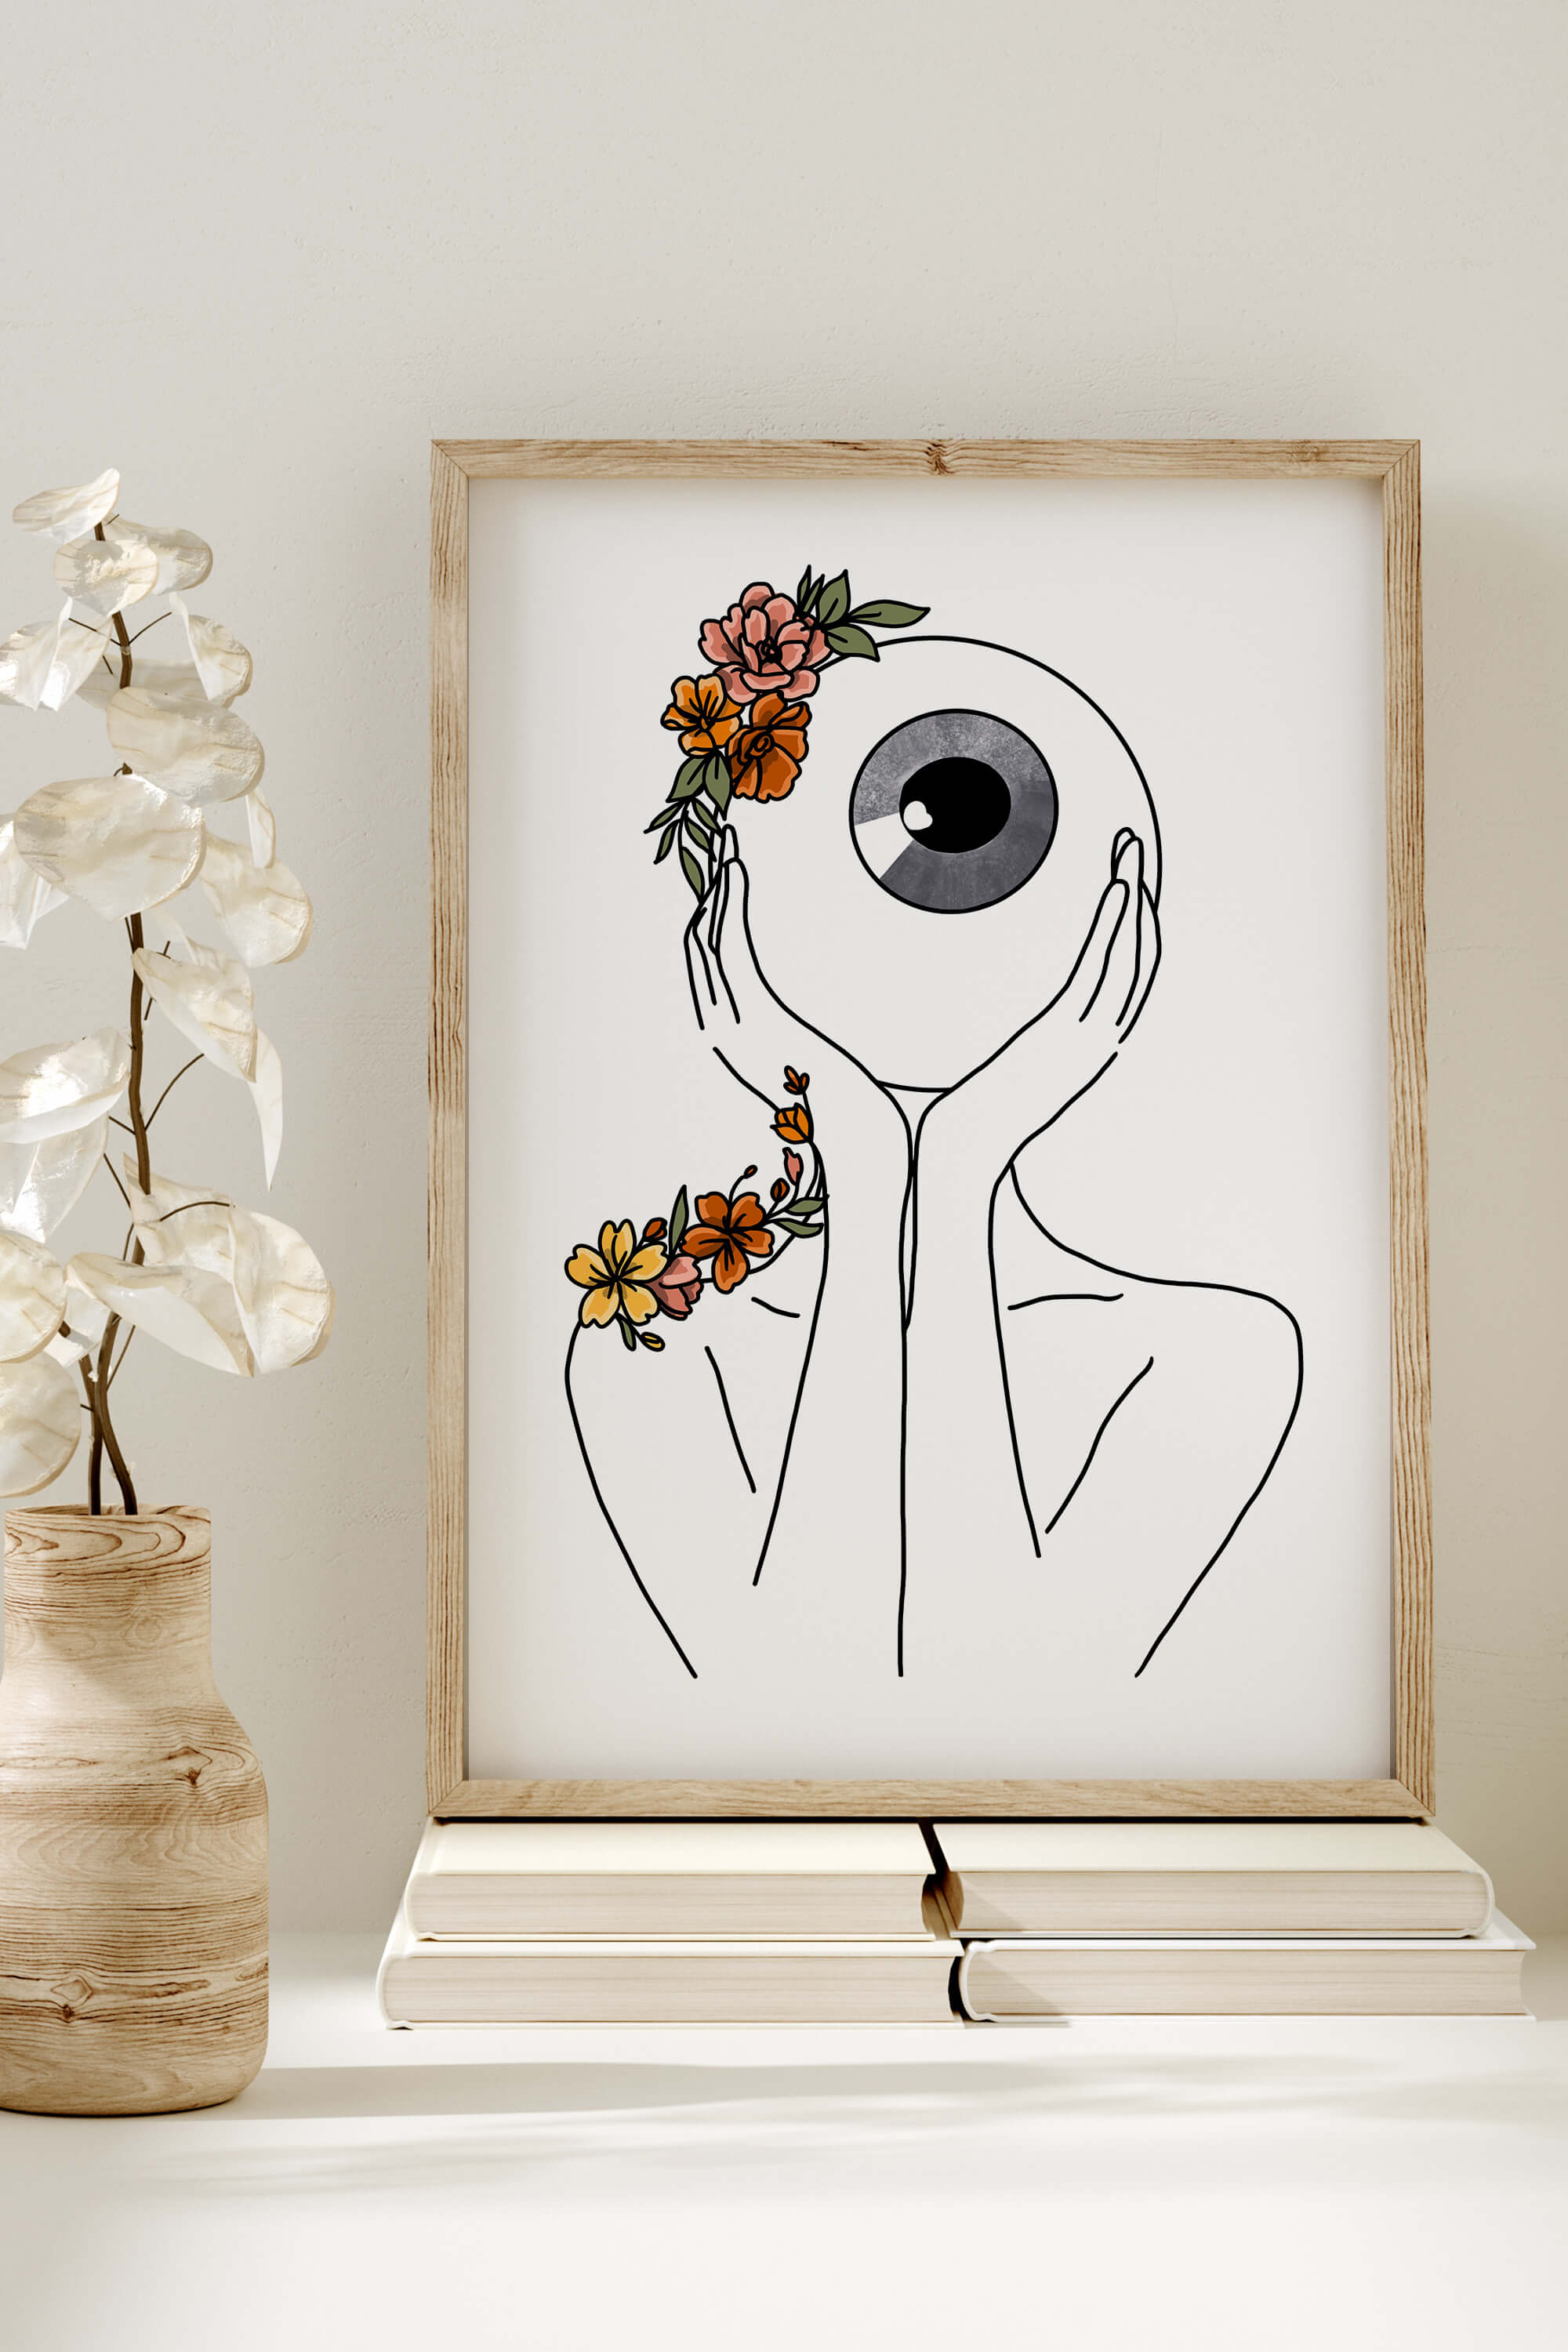 Eye-catching floral anatomy art, harmonizing eye details with abstract flowers.